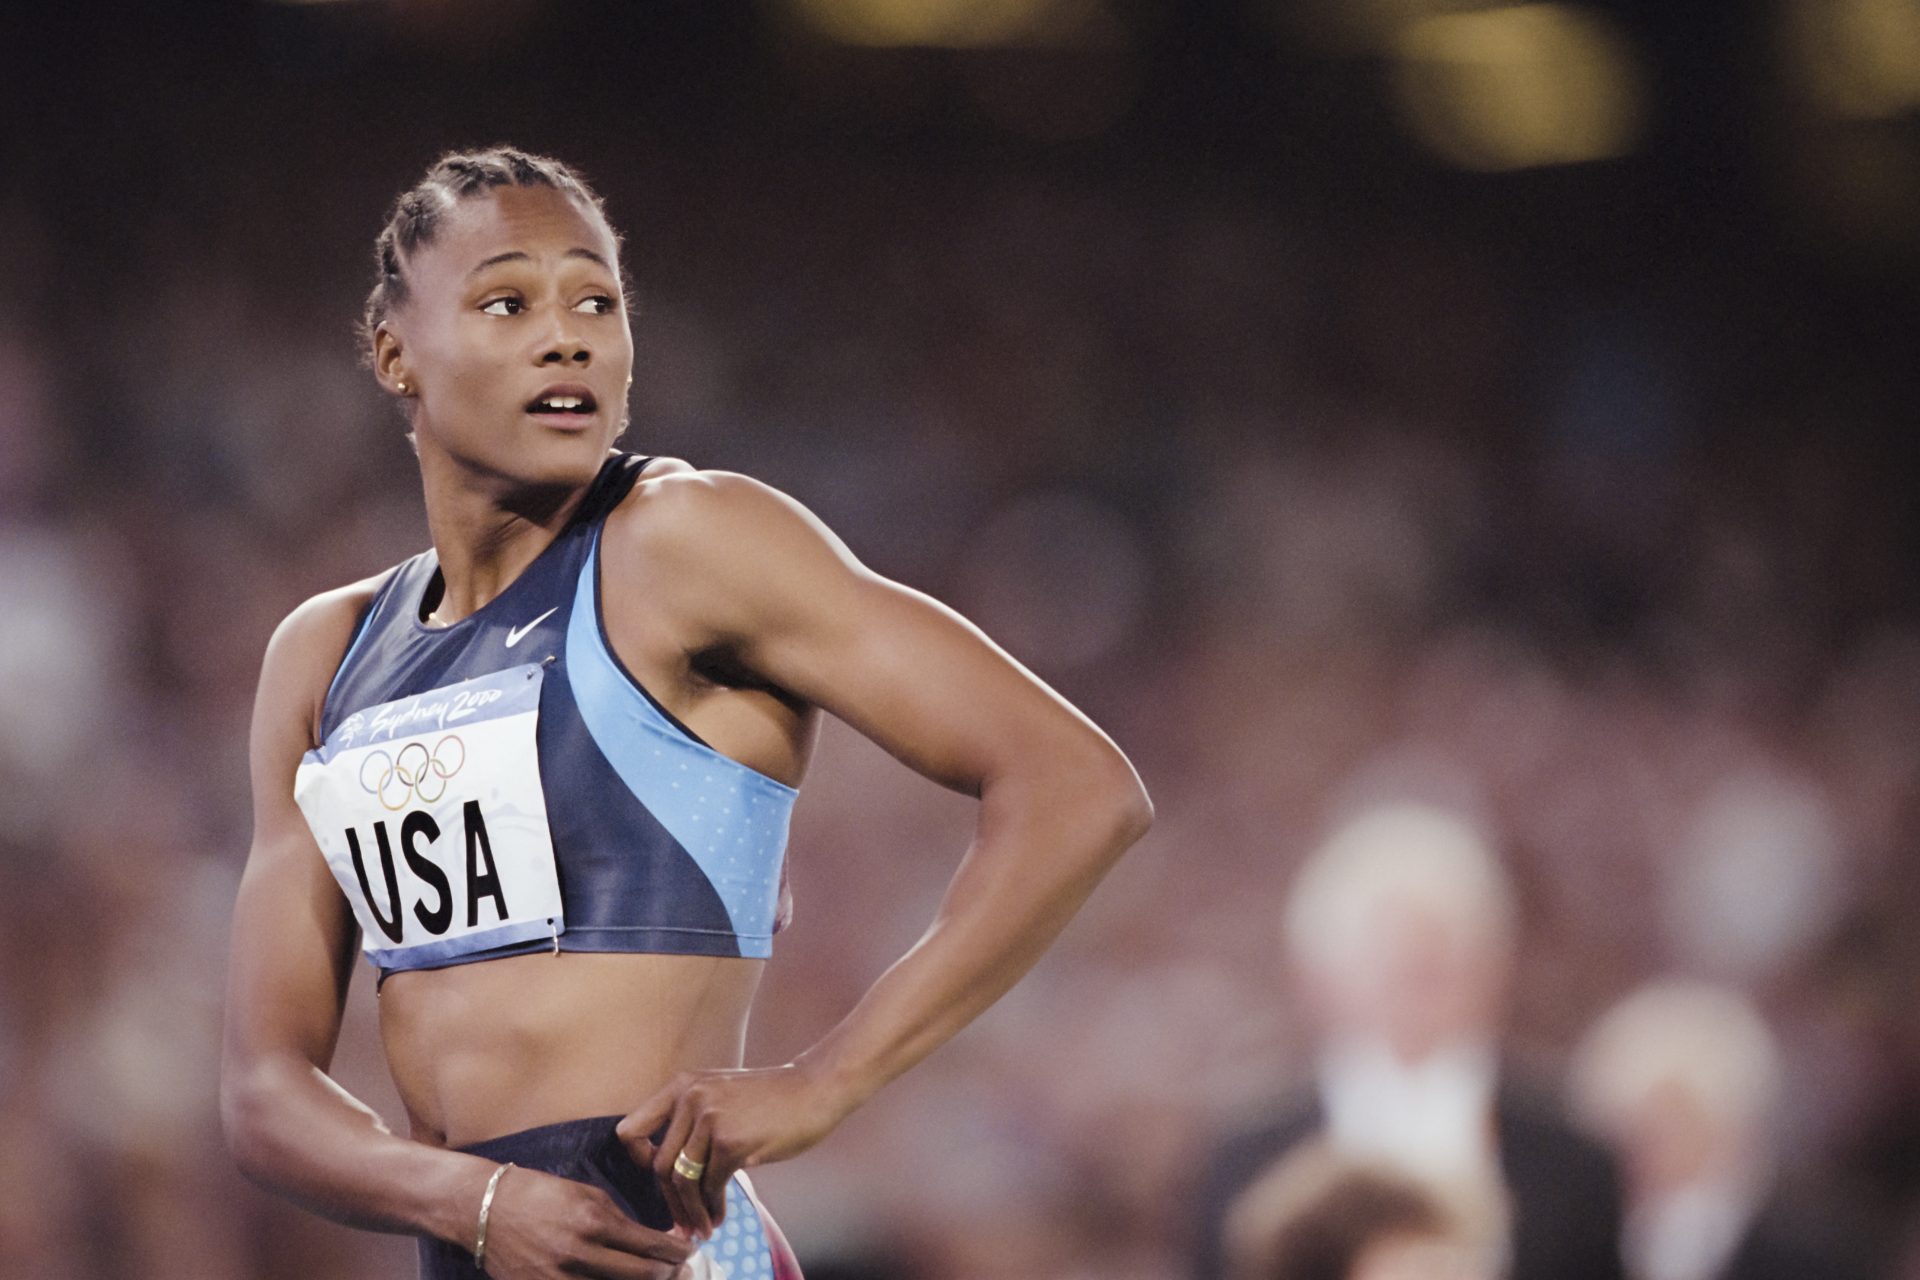 The tragic downfall of Marion Jones: from the podium to the prison